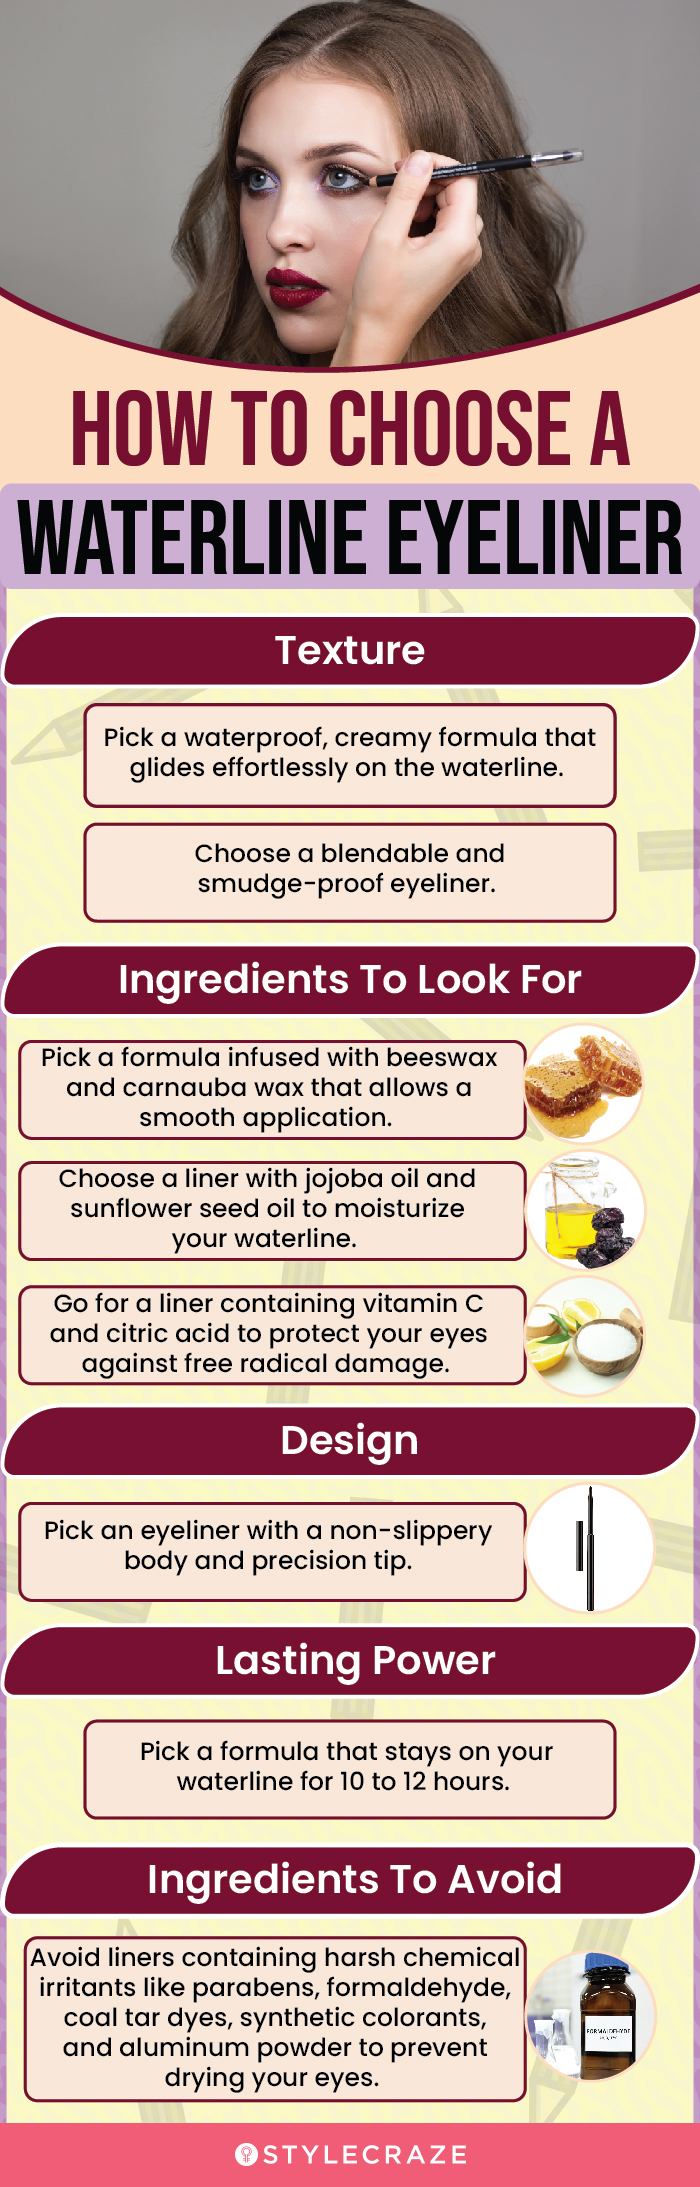 How To Choose A Waterline Eyeliner [infographic]